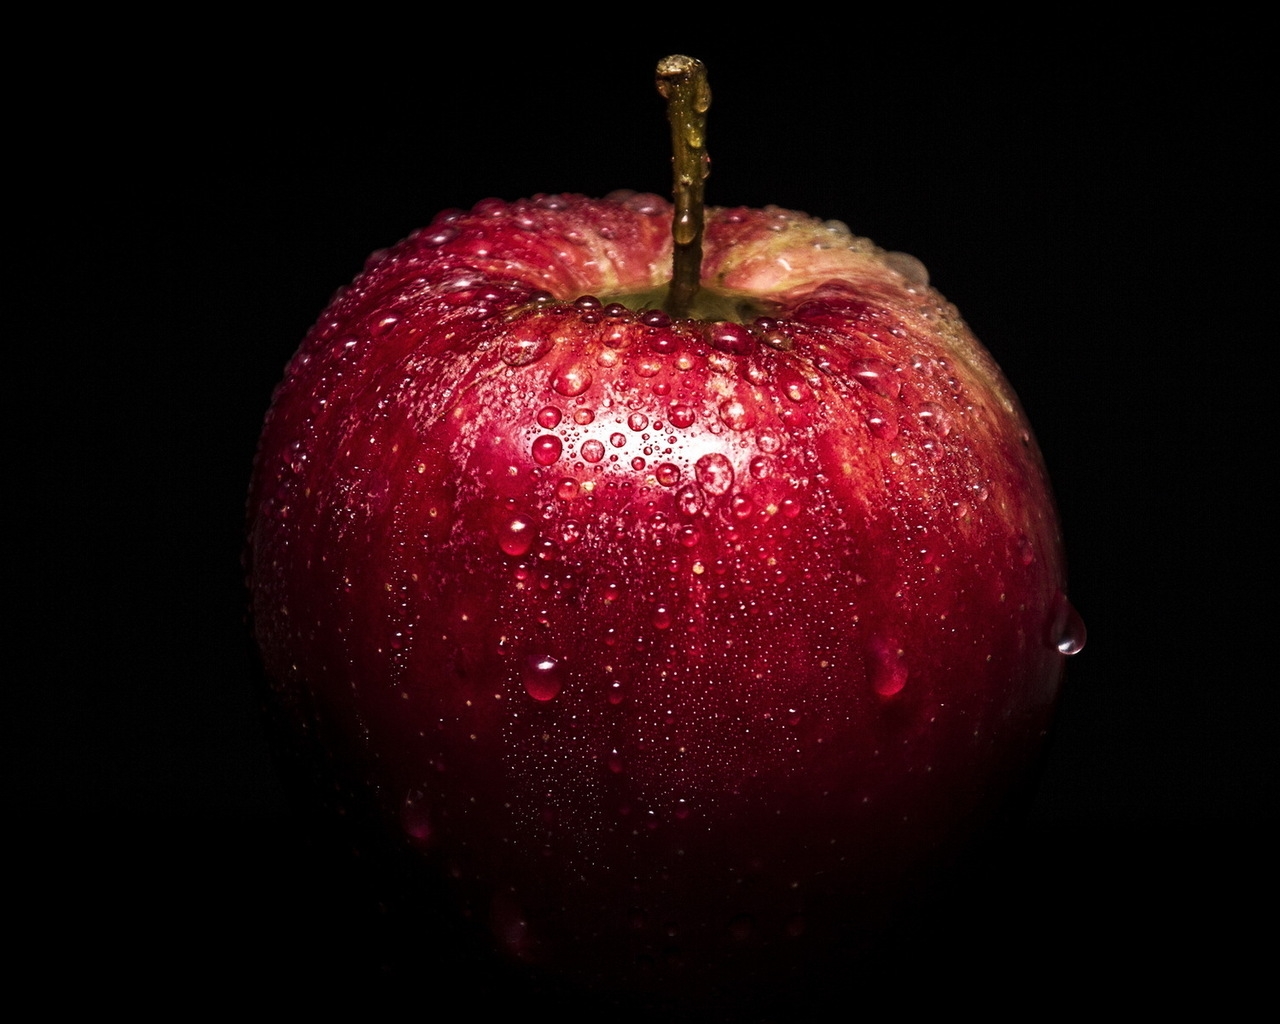 Red Delicious Apple for 1280 x 1024 resolution